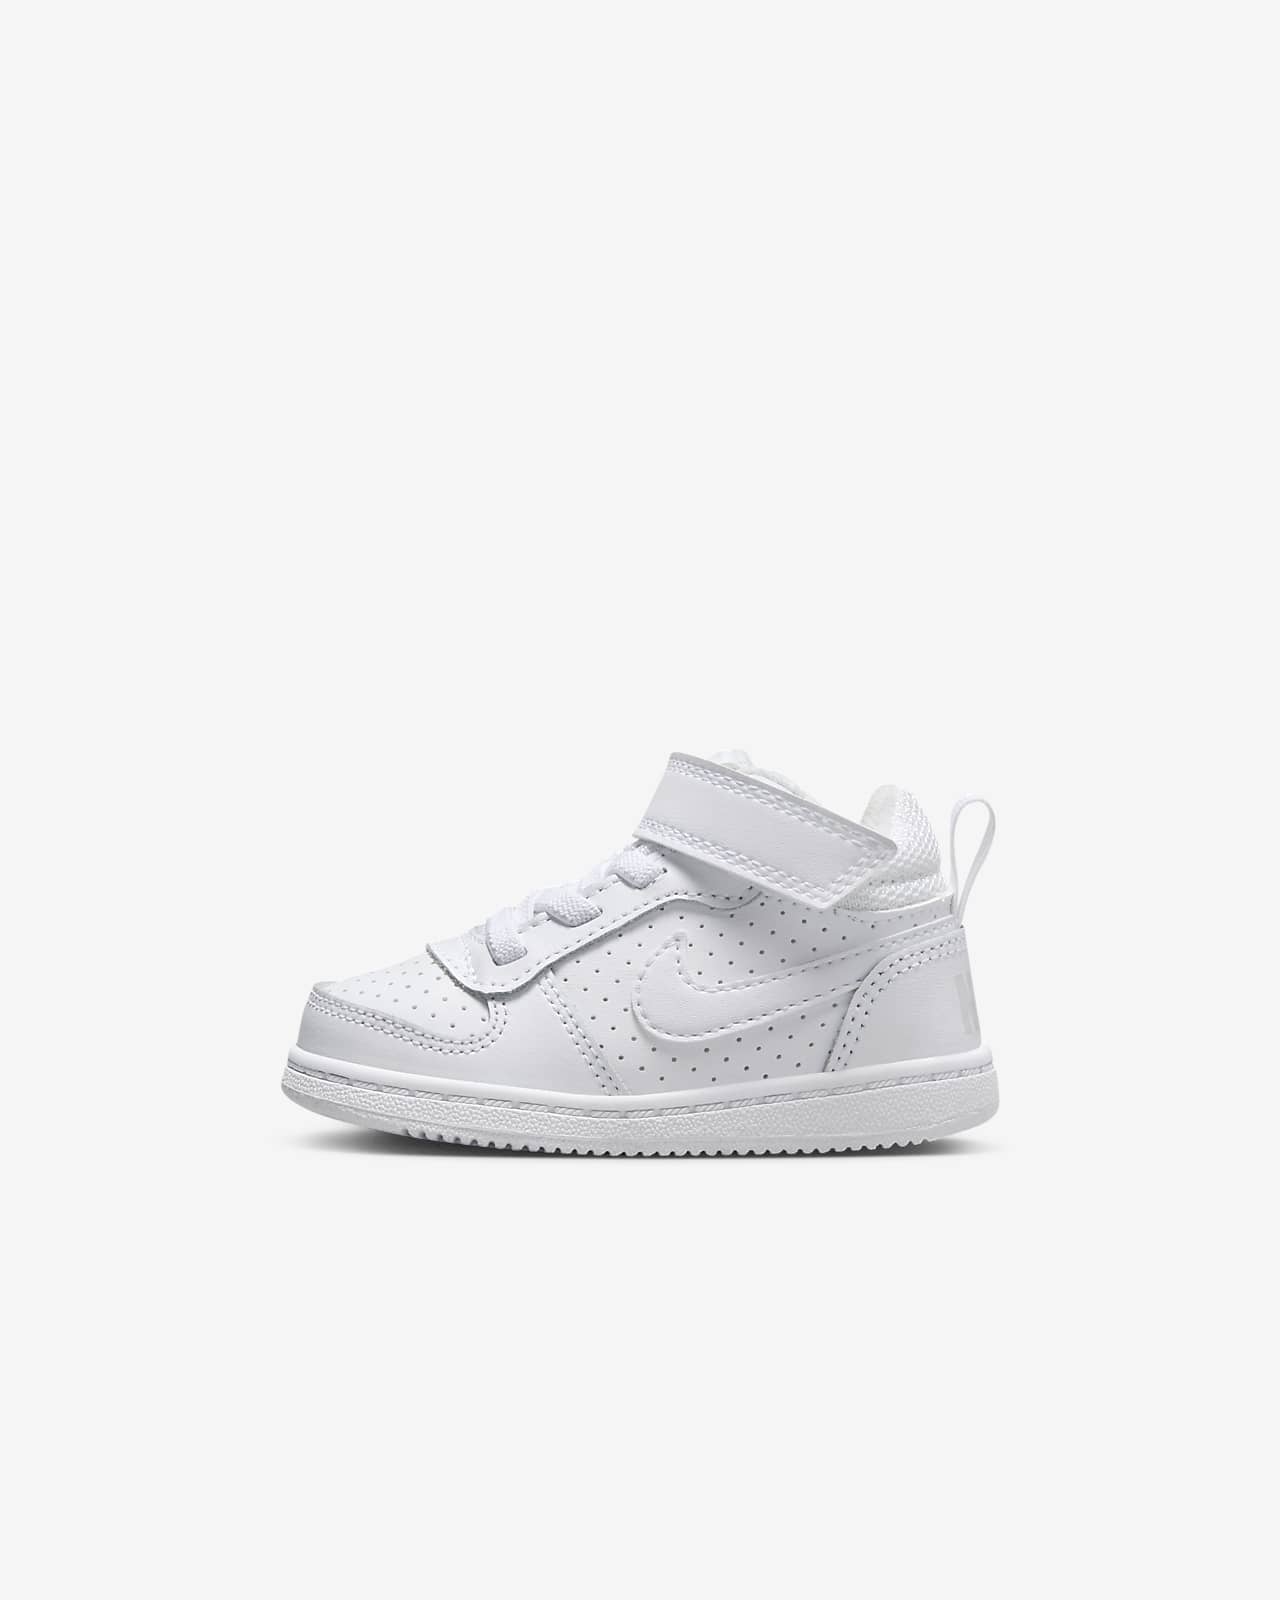 Nike Court Borough Mid Baby/Toddler Shoes